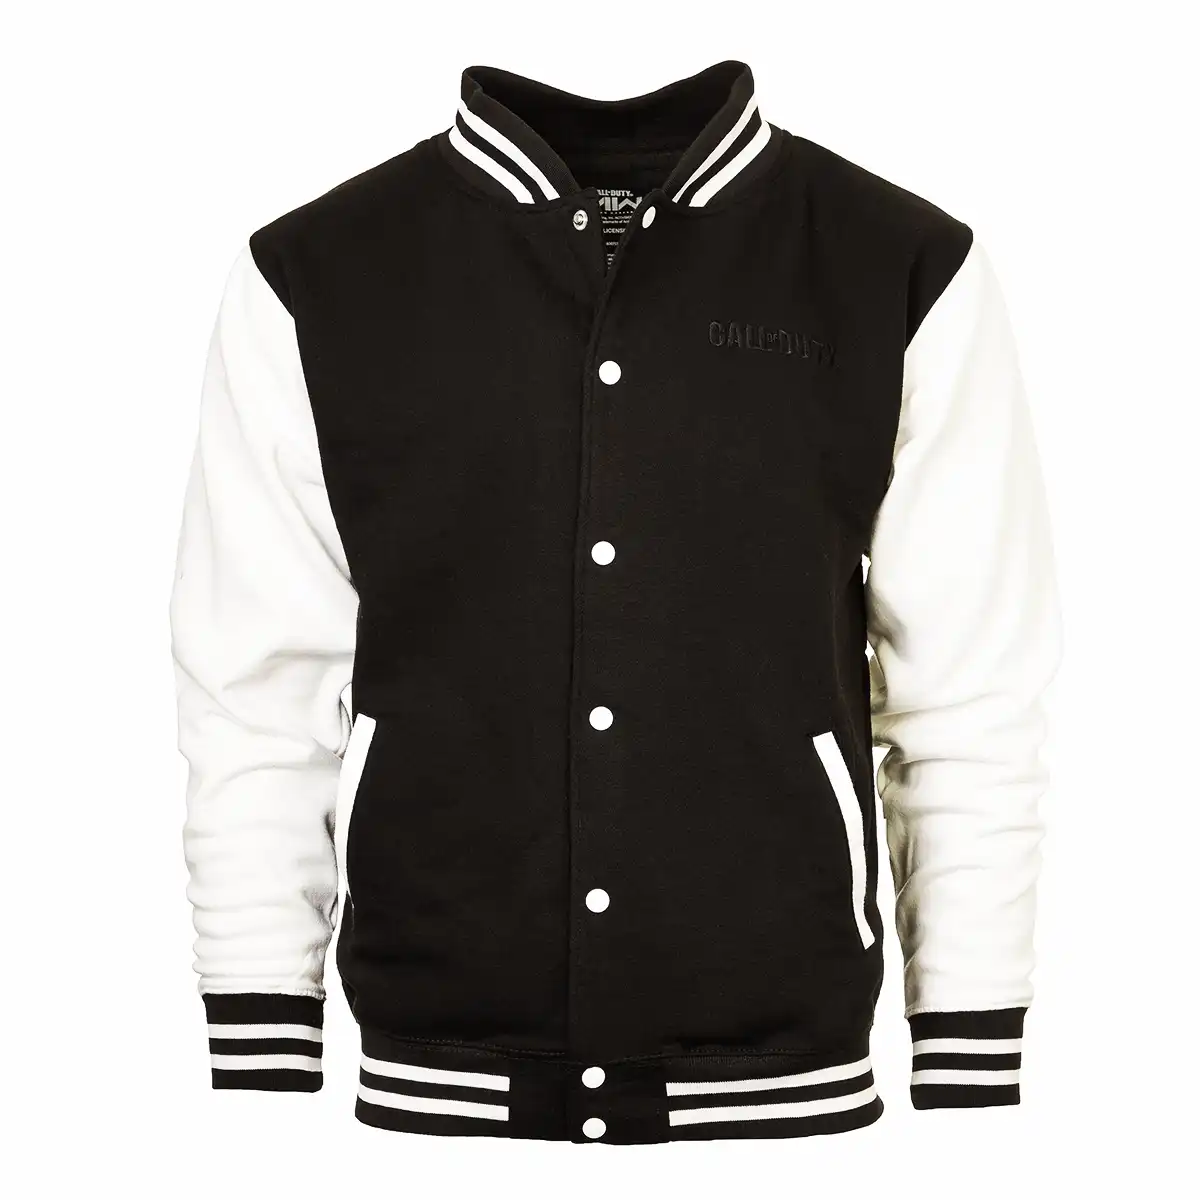 Call of Duty College Jacket "Ghost" Black/White XXL